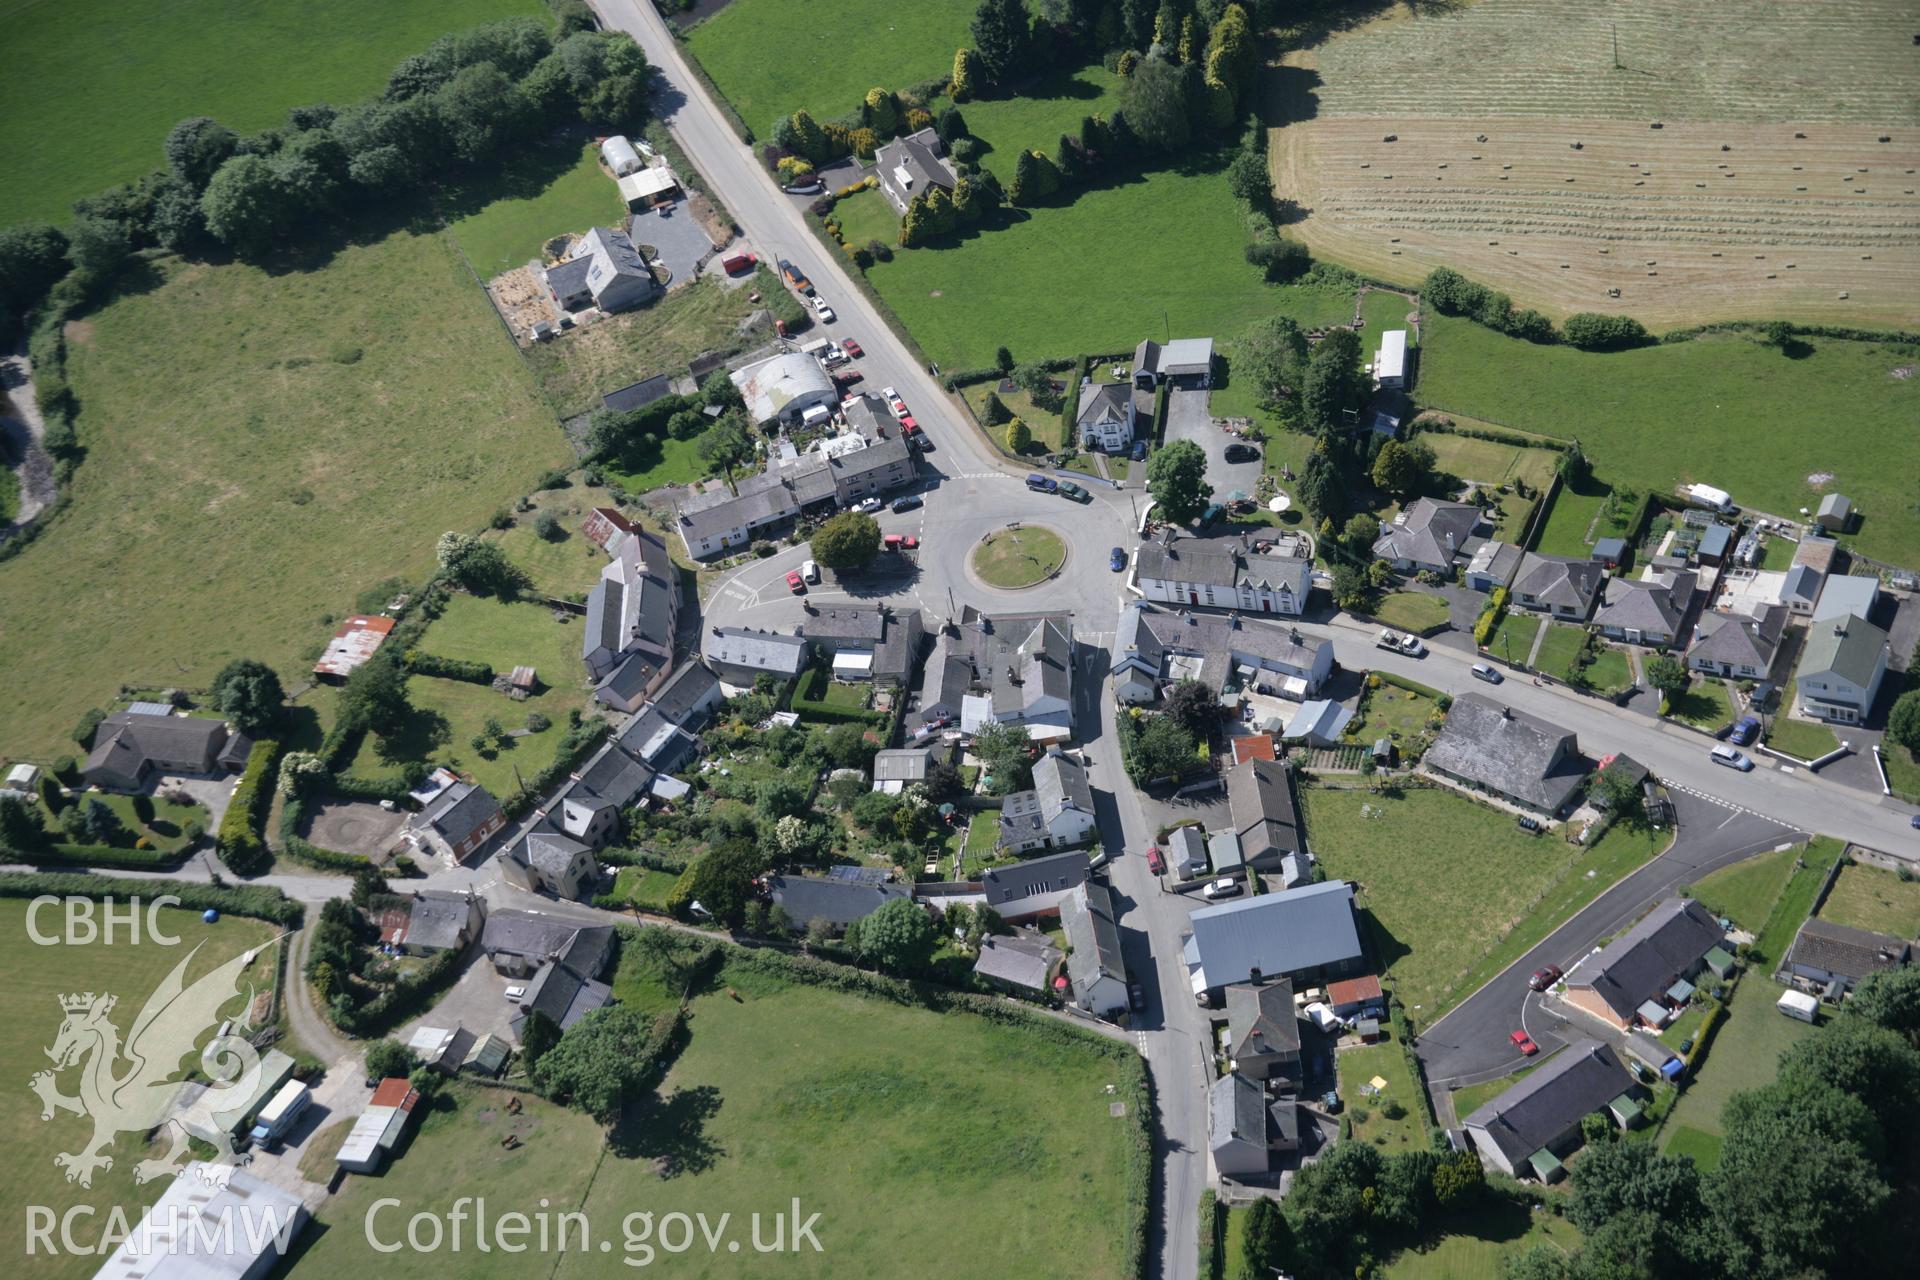 RCAHMW colour oblique aerial photograph of Llangeitho village, viewed from the south-east. Taken on 23 June 2005 by Toby Driver